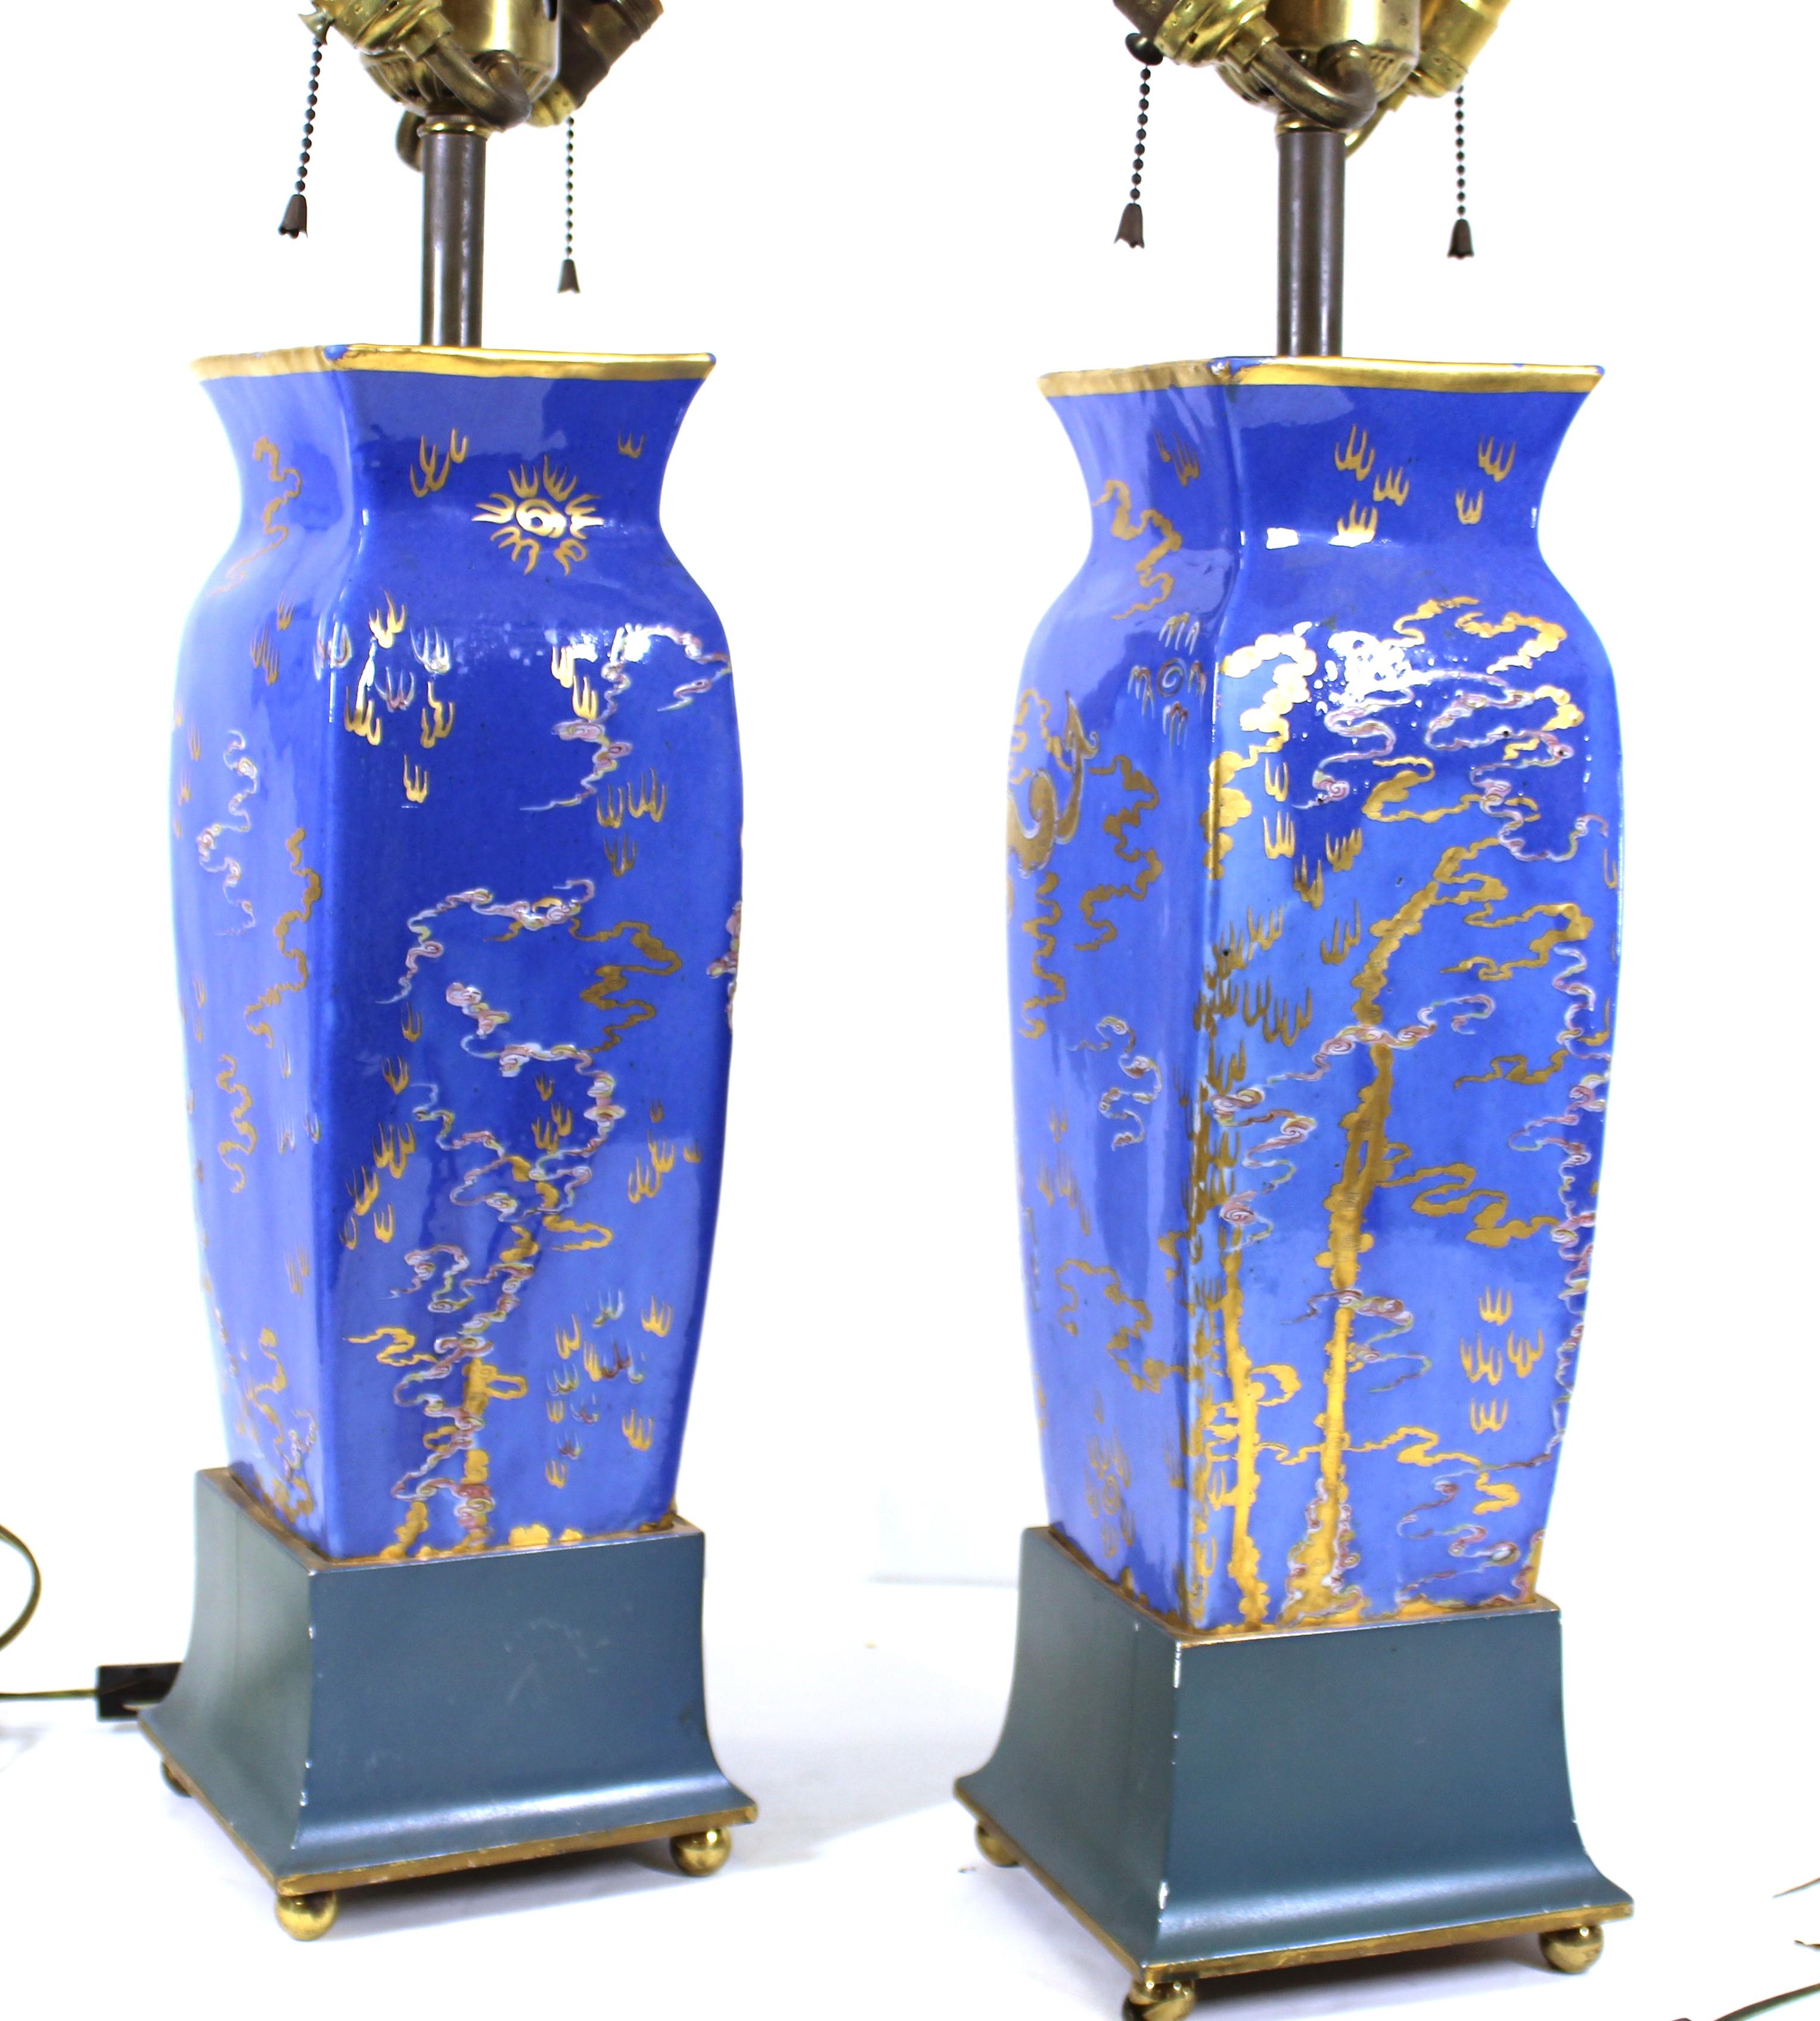 Mid-20th Century Chinese Glazed Porcelain Vase Table Lamps with Golden Dragons